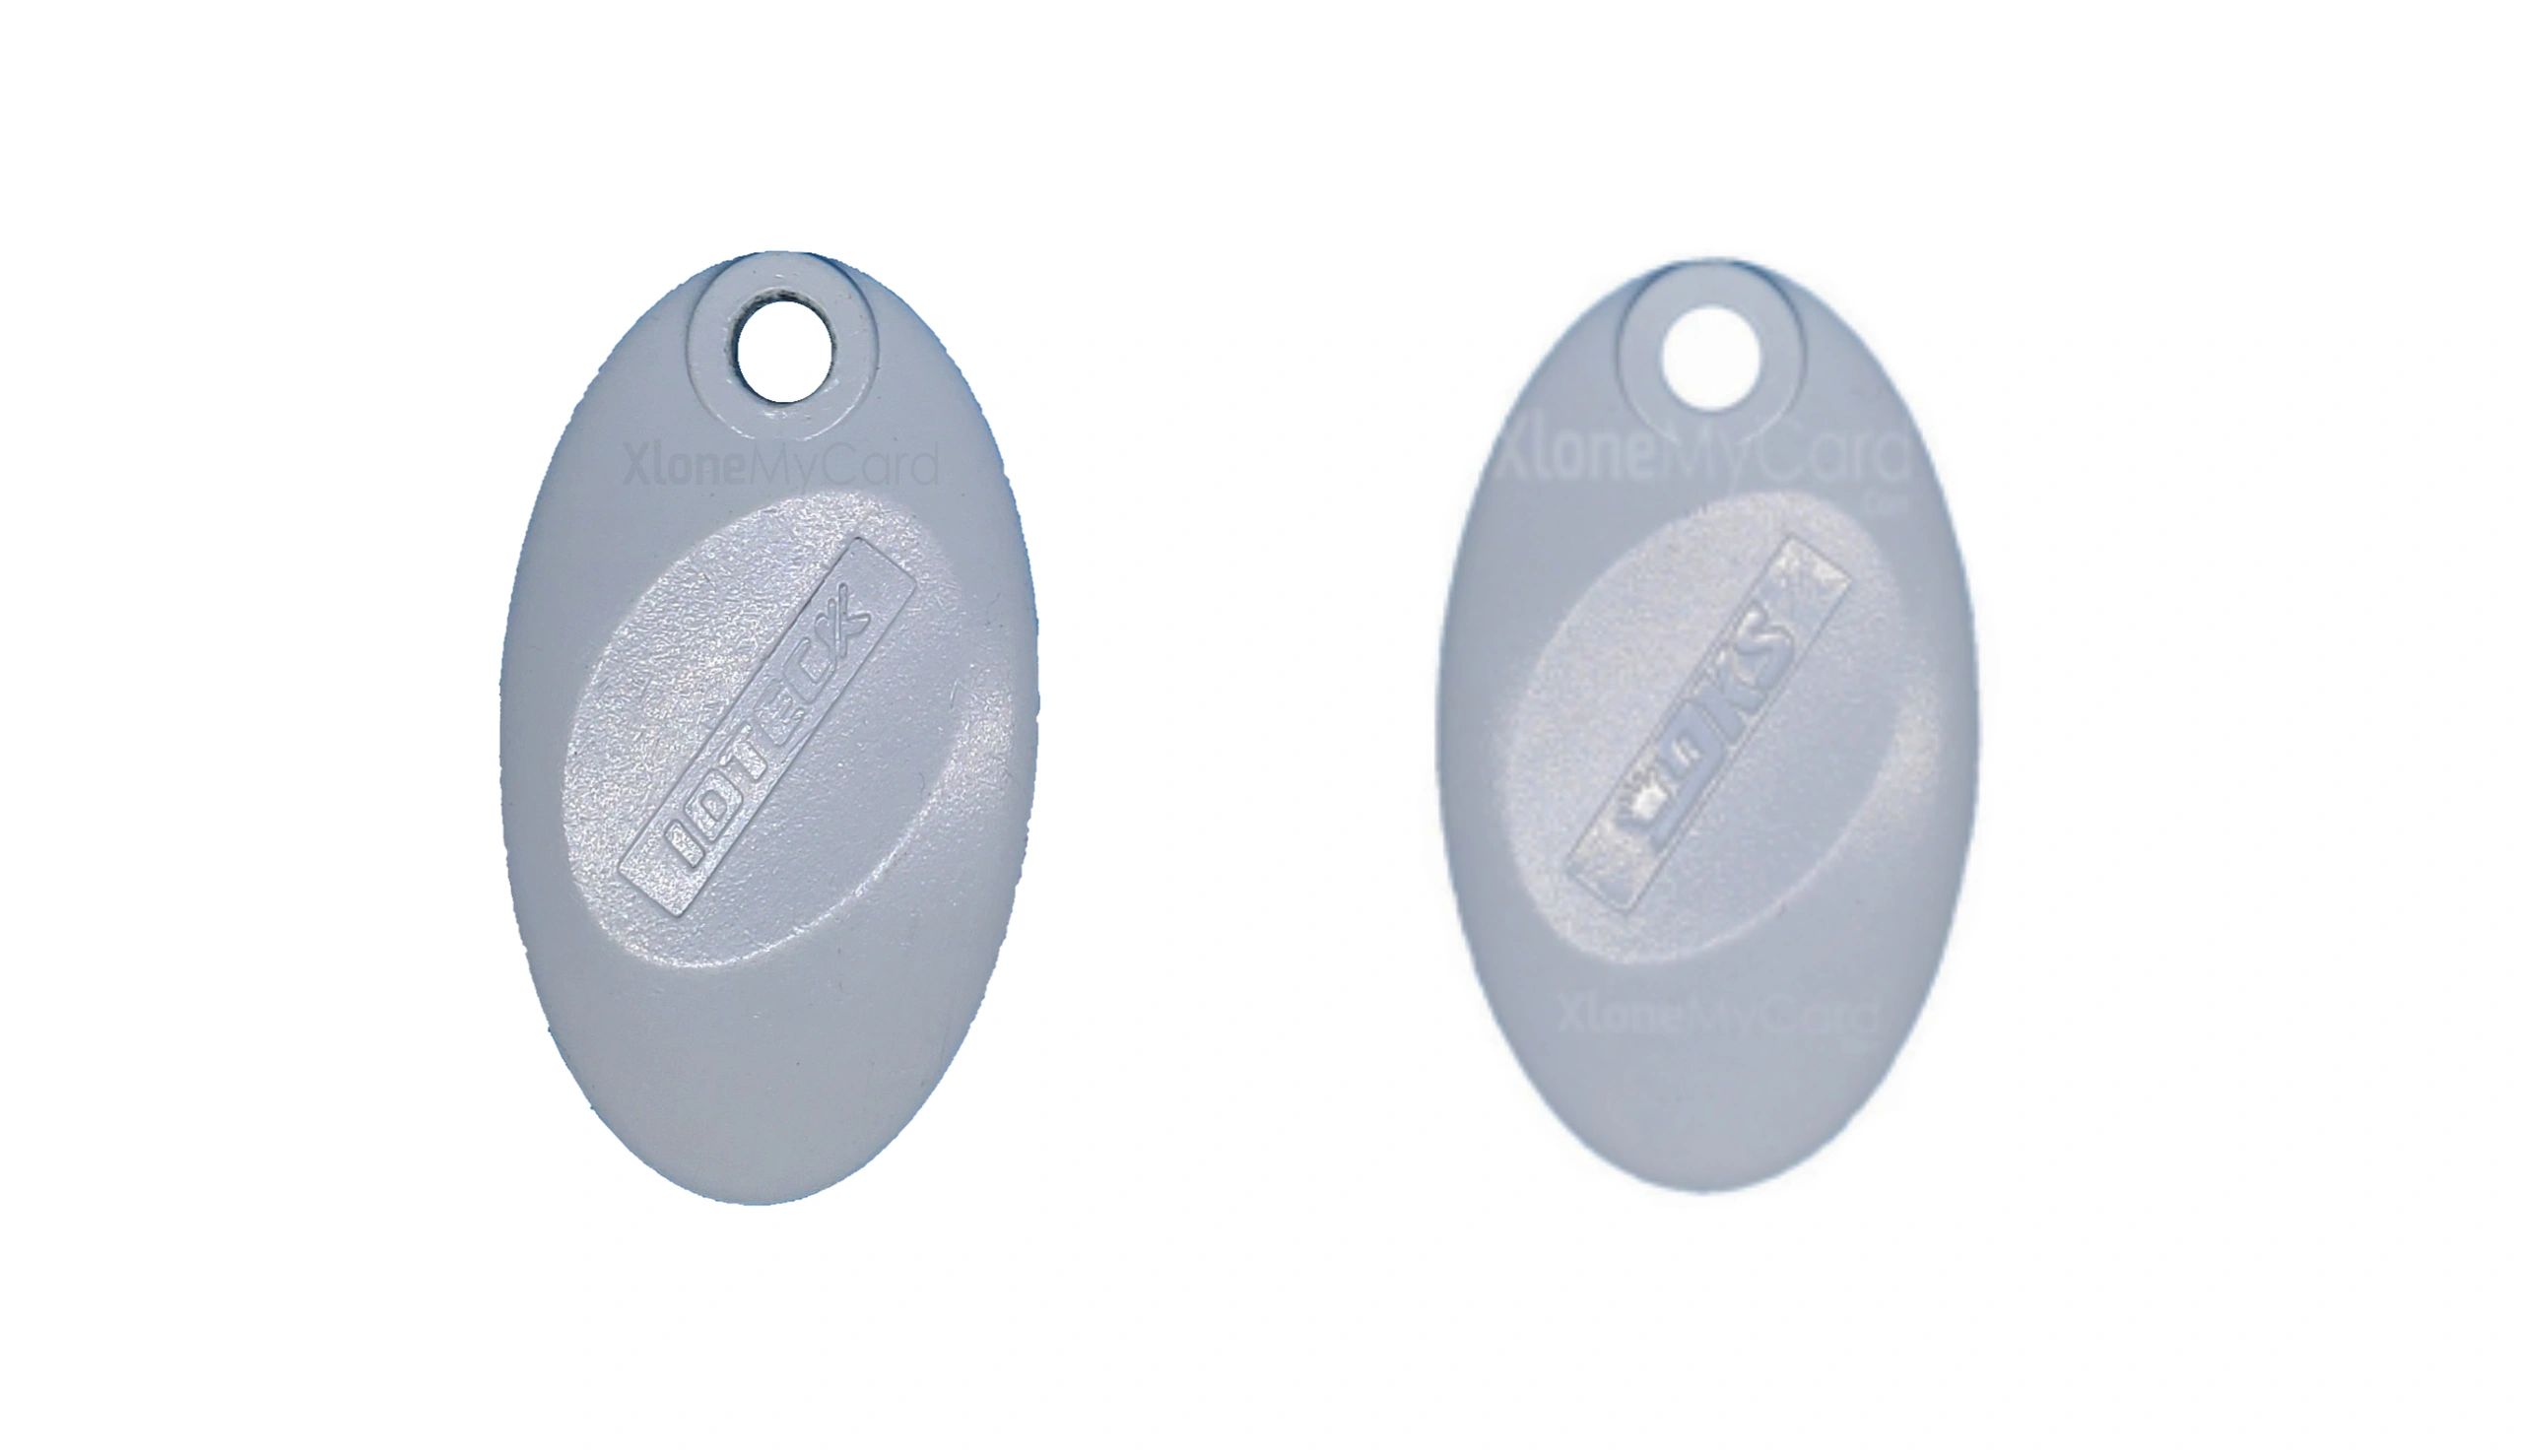 schlage key fob duplicate by lowes